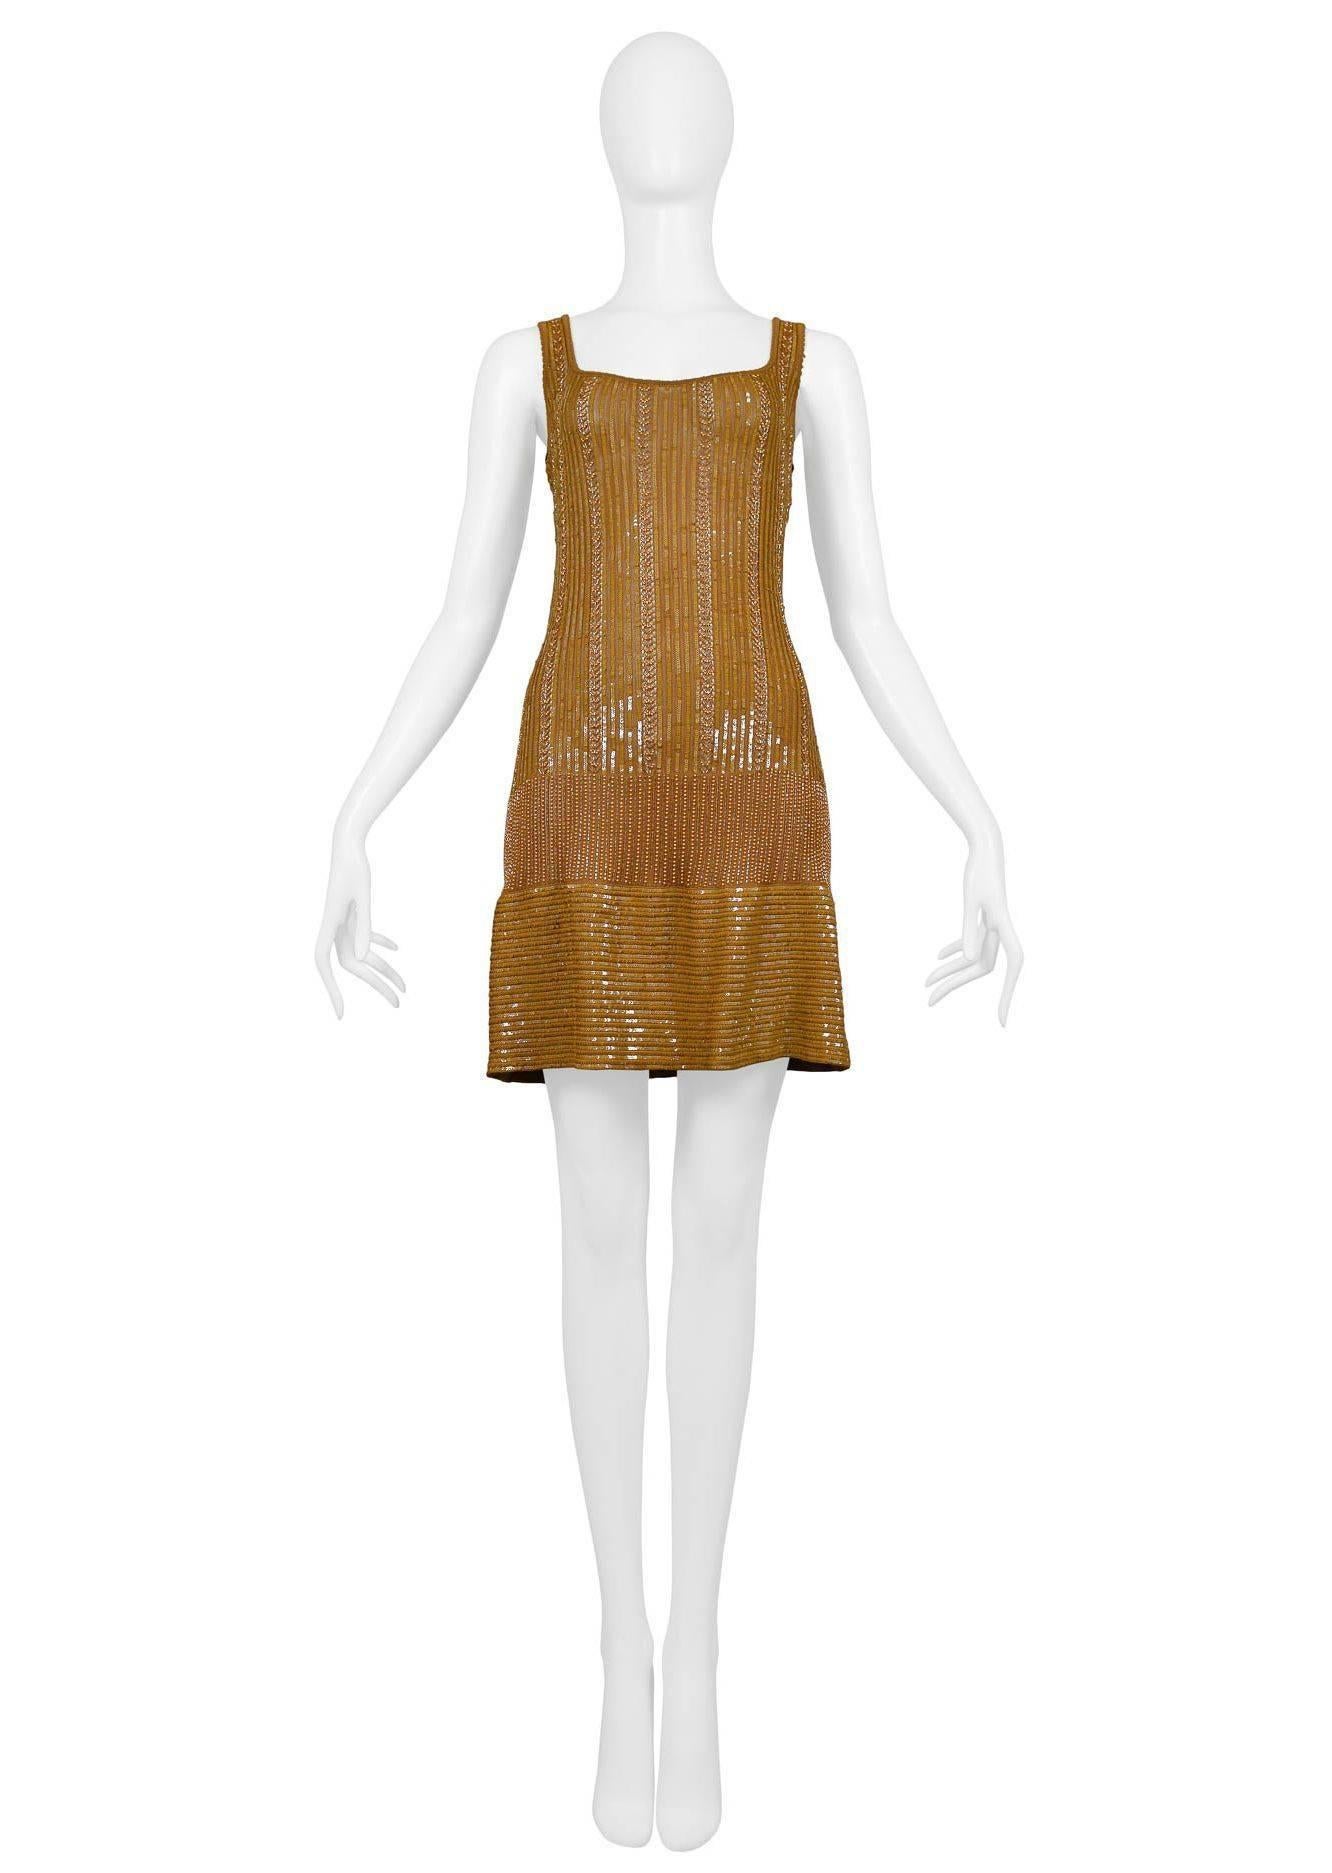 Rare vintage Azzedine Alaia gold beaded body con cocktail dress. Classic fitted knit body covered in gold beads, low square neckline, and beaded straps that will cover undergarments. Dress has clean unobstructed waistline and flat panel at skirt.